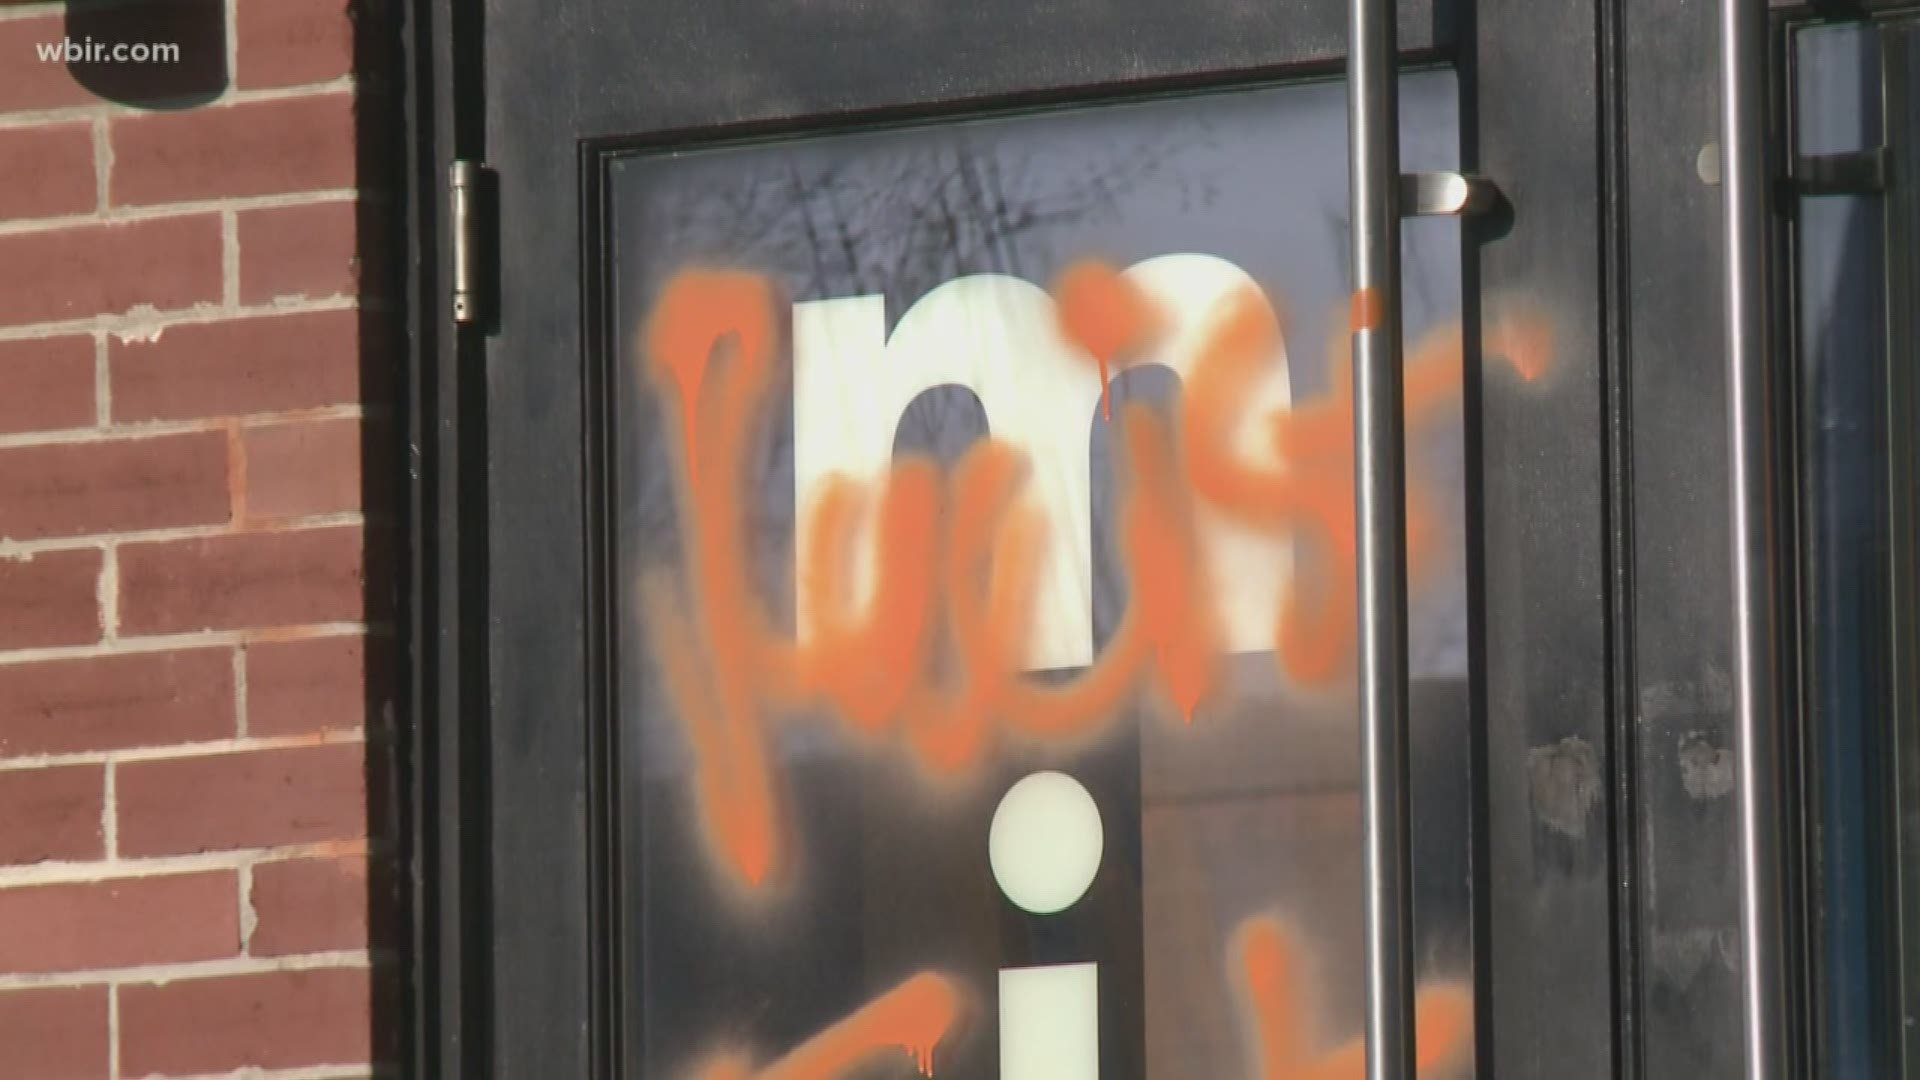 Police are looking into vandalism reported at the Knoxville office of democratic presidential candidate Michael Bloomberg.